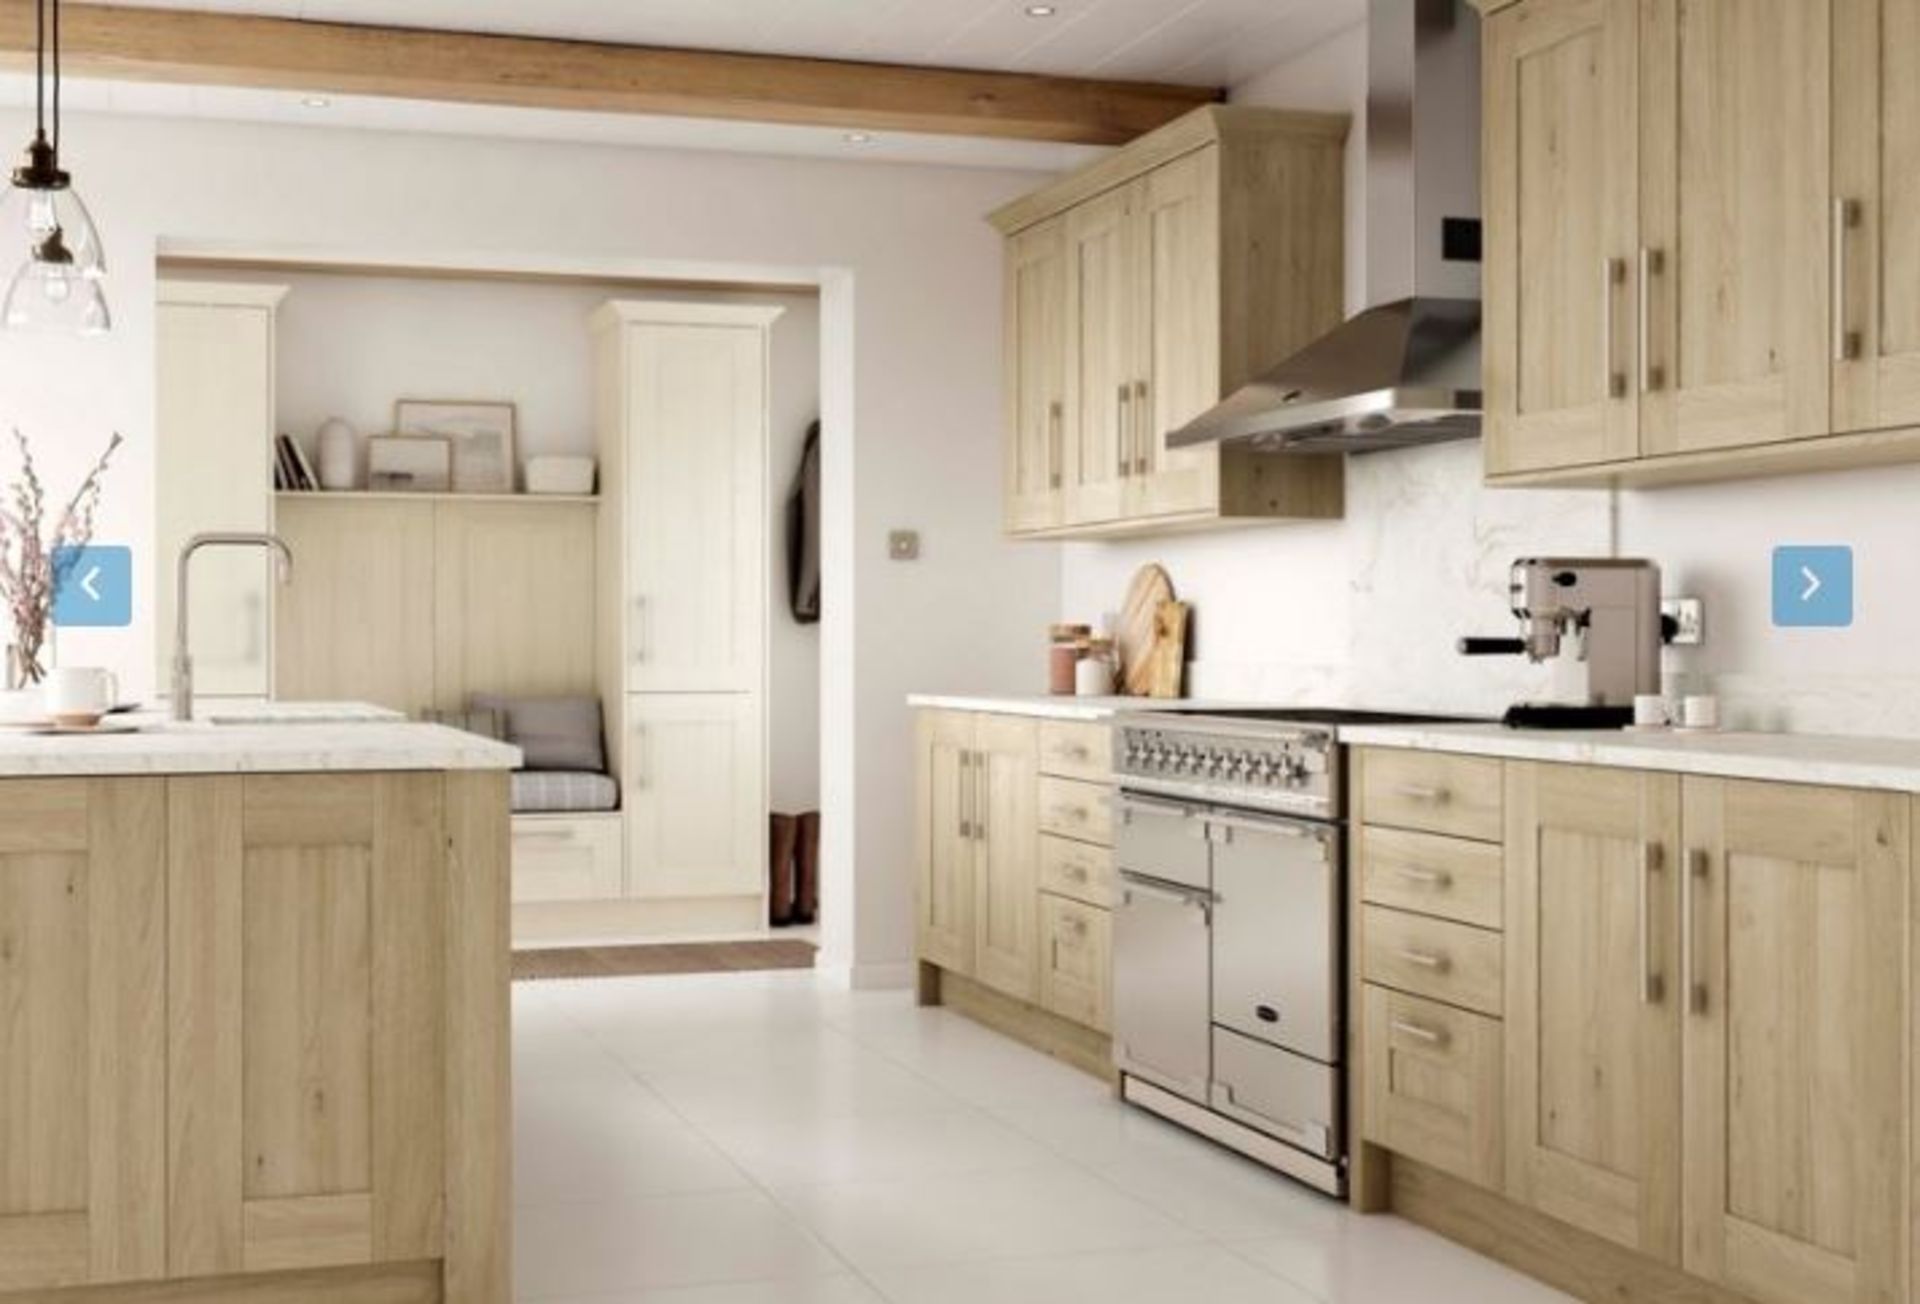 Tiverton solid oak kitchen Range, approx. 7138 items including doors drawers inc curved doors,